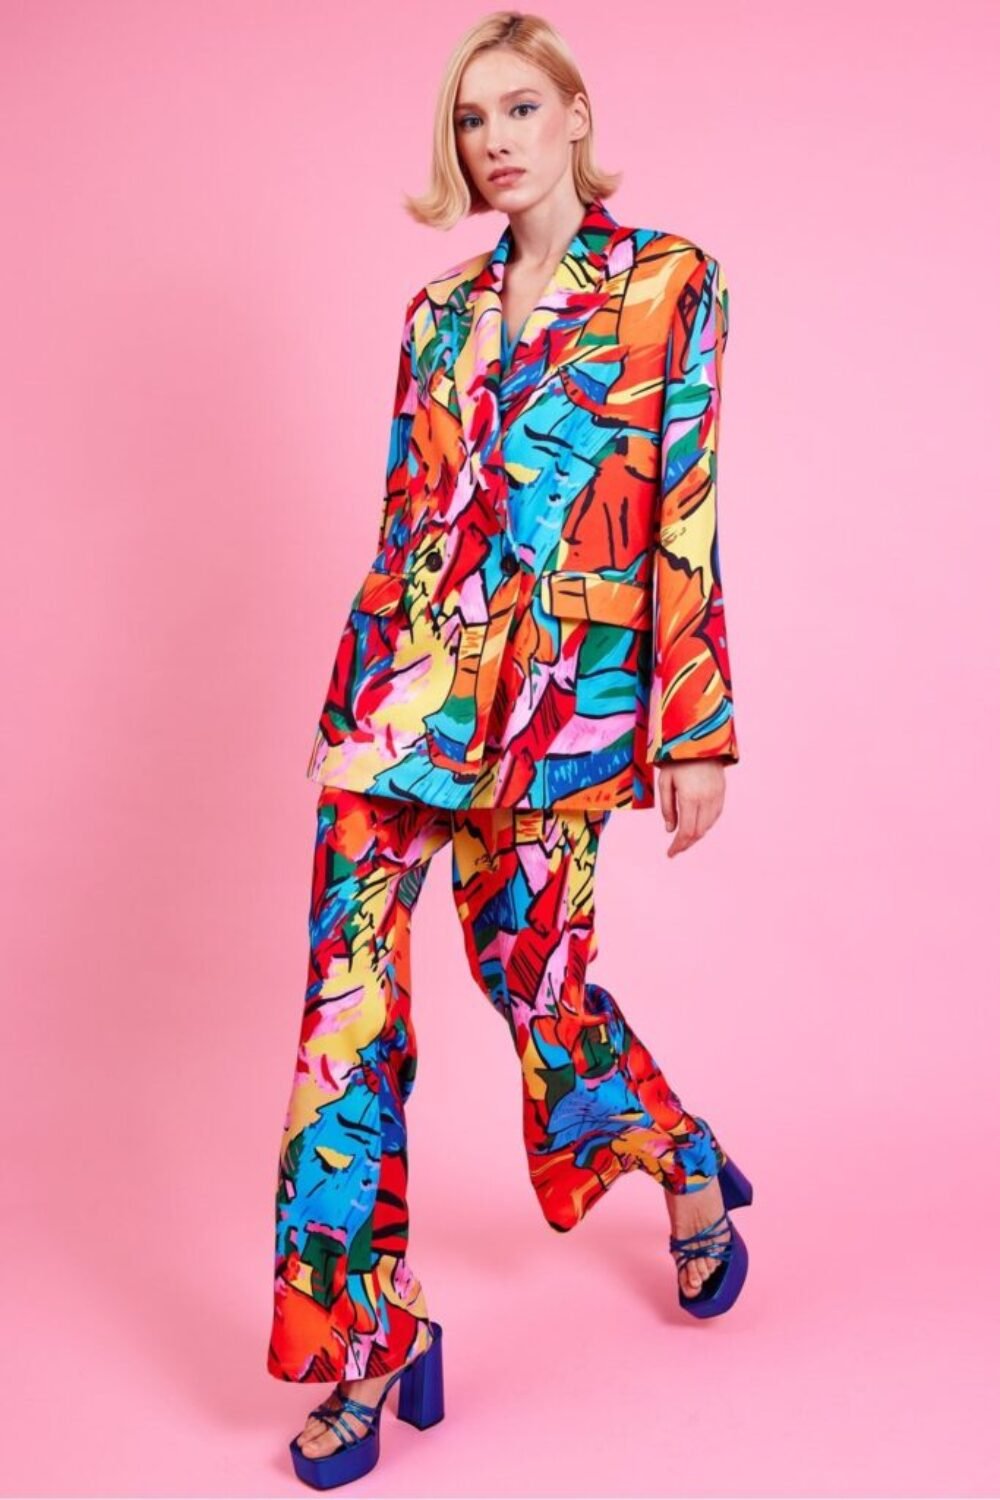 Shop Freddie 80's Trousers and women's luxury and designer clothes at www.lux-apparel.co.uk